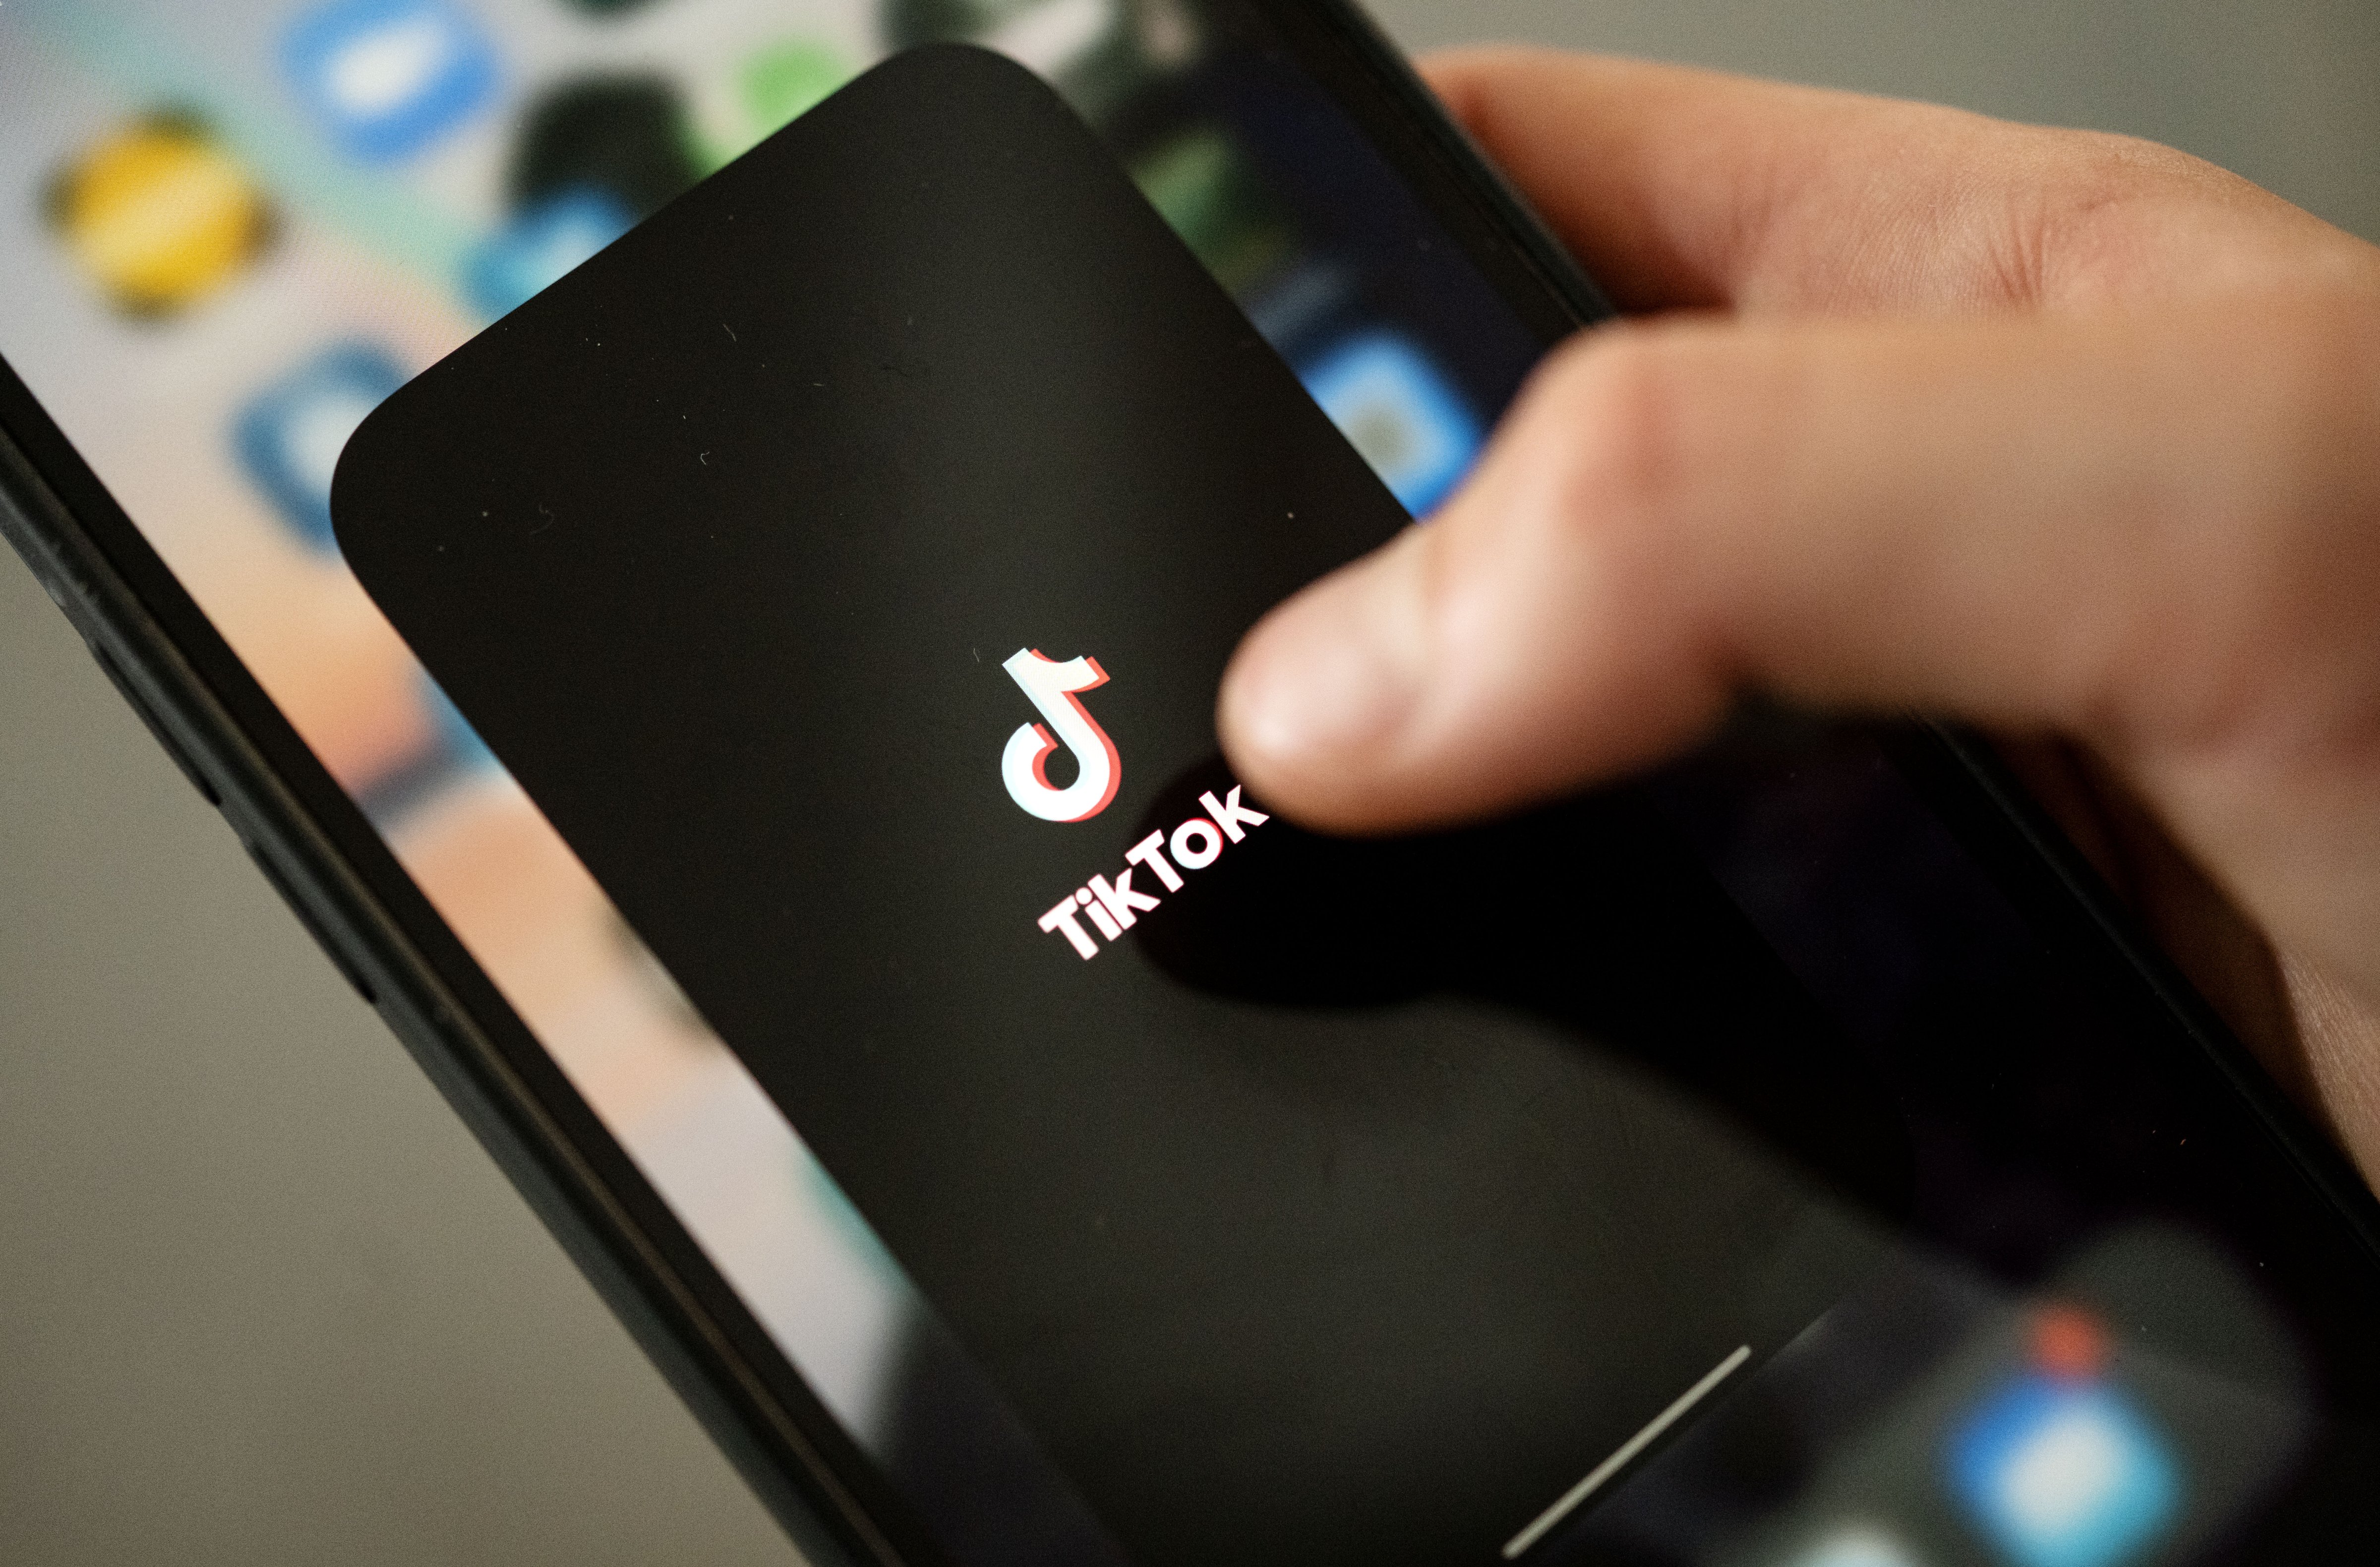 A teenager taps the TikTok logo on a smartphone. (Marijan Murat - picture alliance / Getty Images)